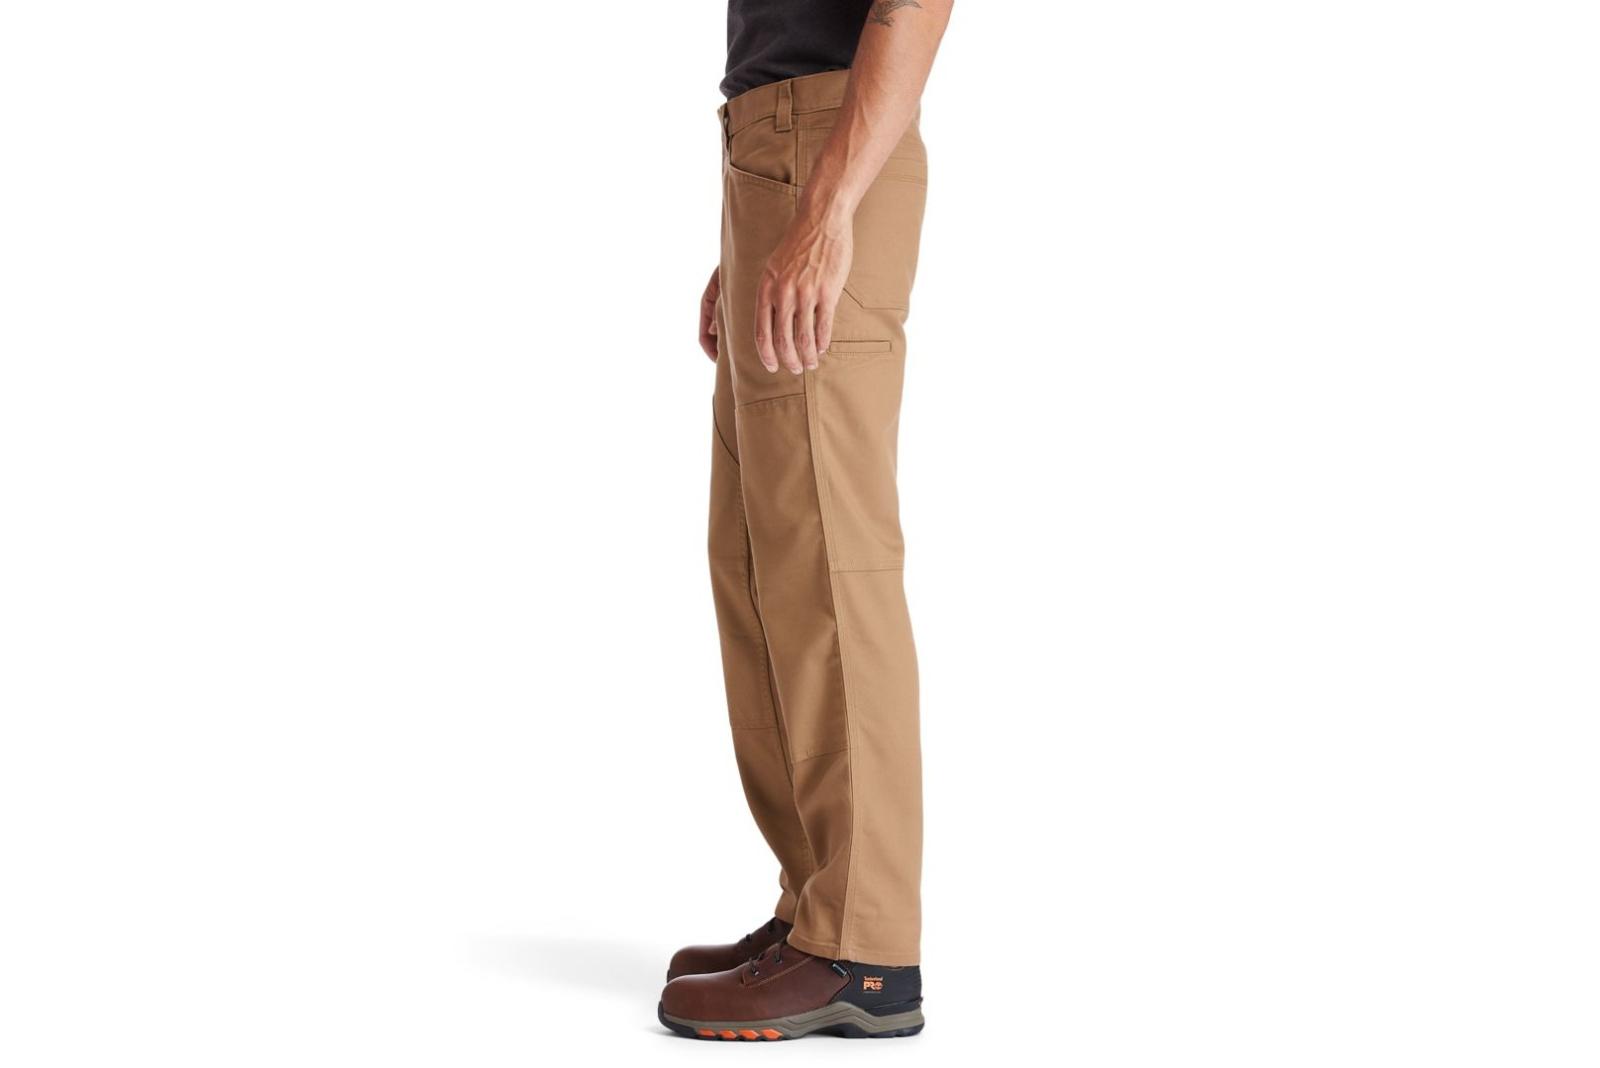 Timberland PRO Men's 8 Series Utility Pant w/ Knee Overlay